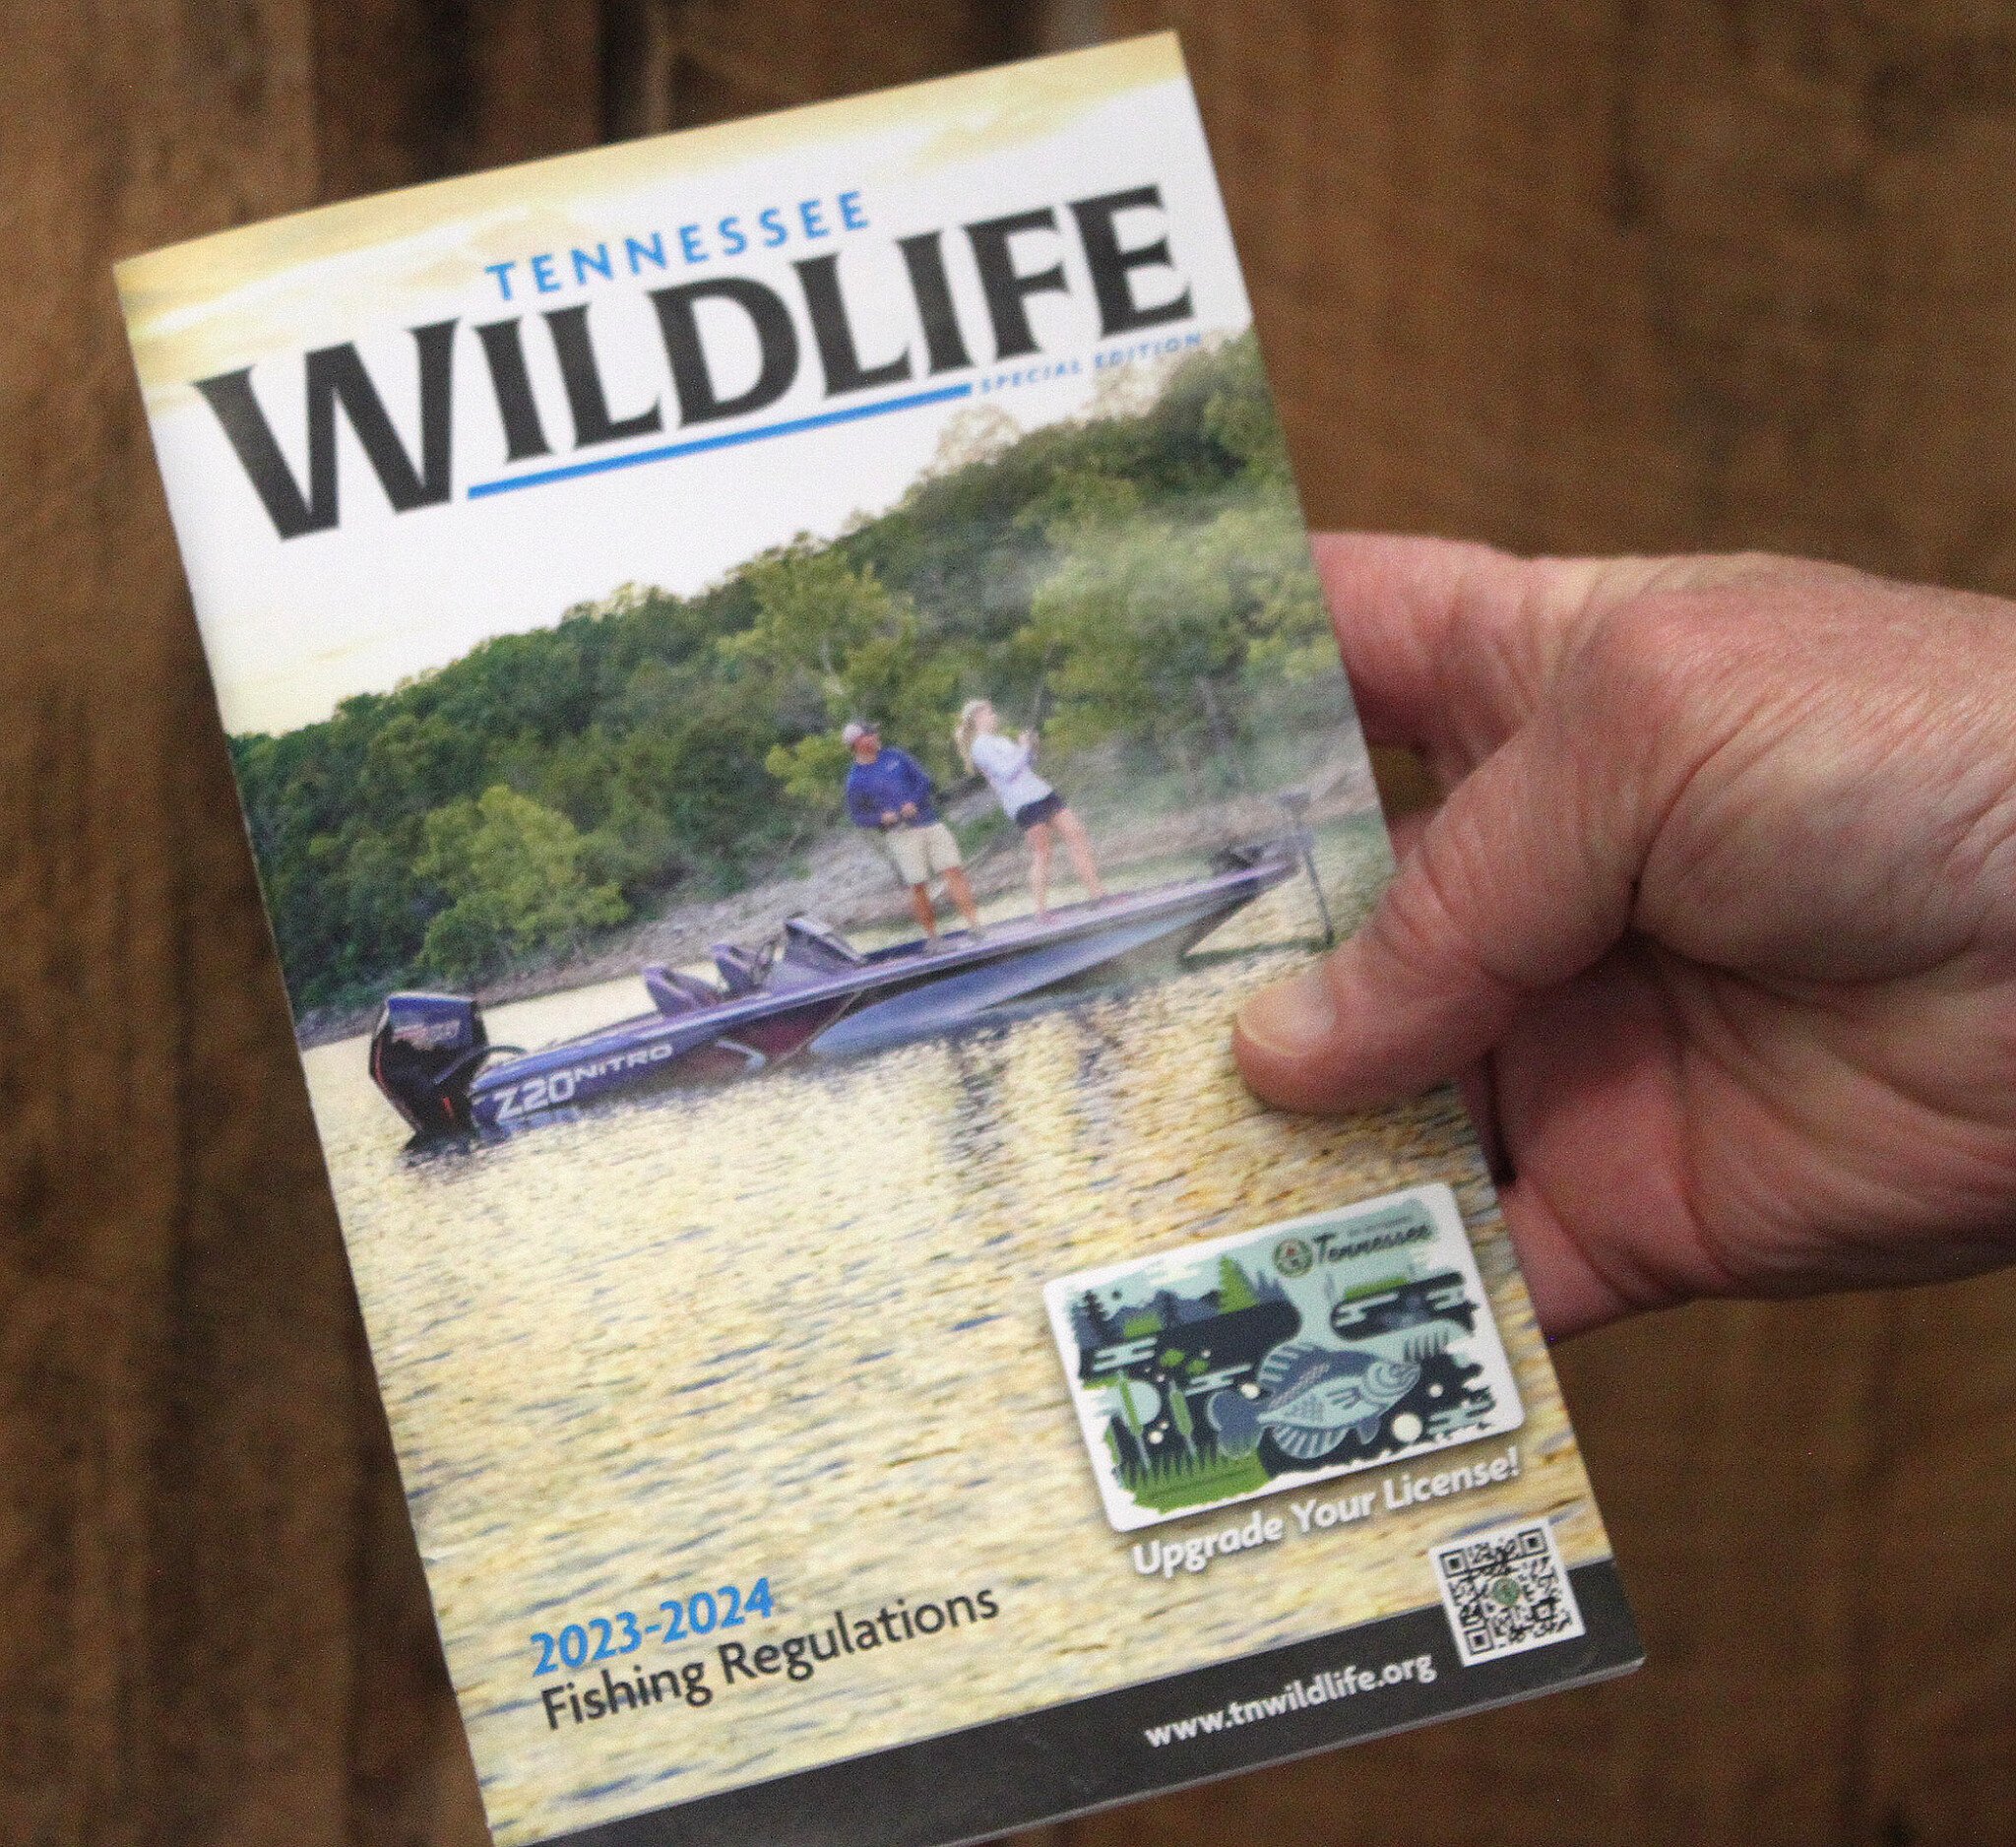 202324 fishing regulations in effect, new guide available WBBJ TV